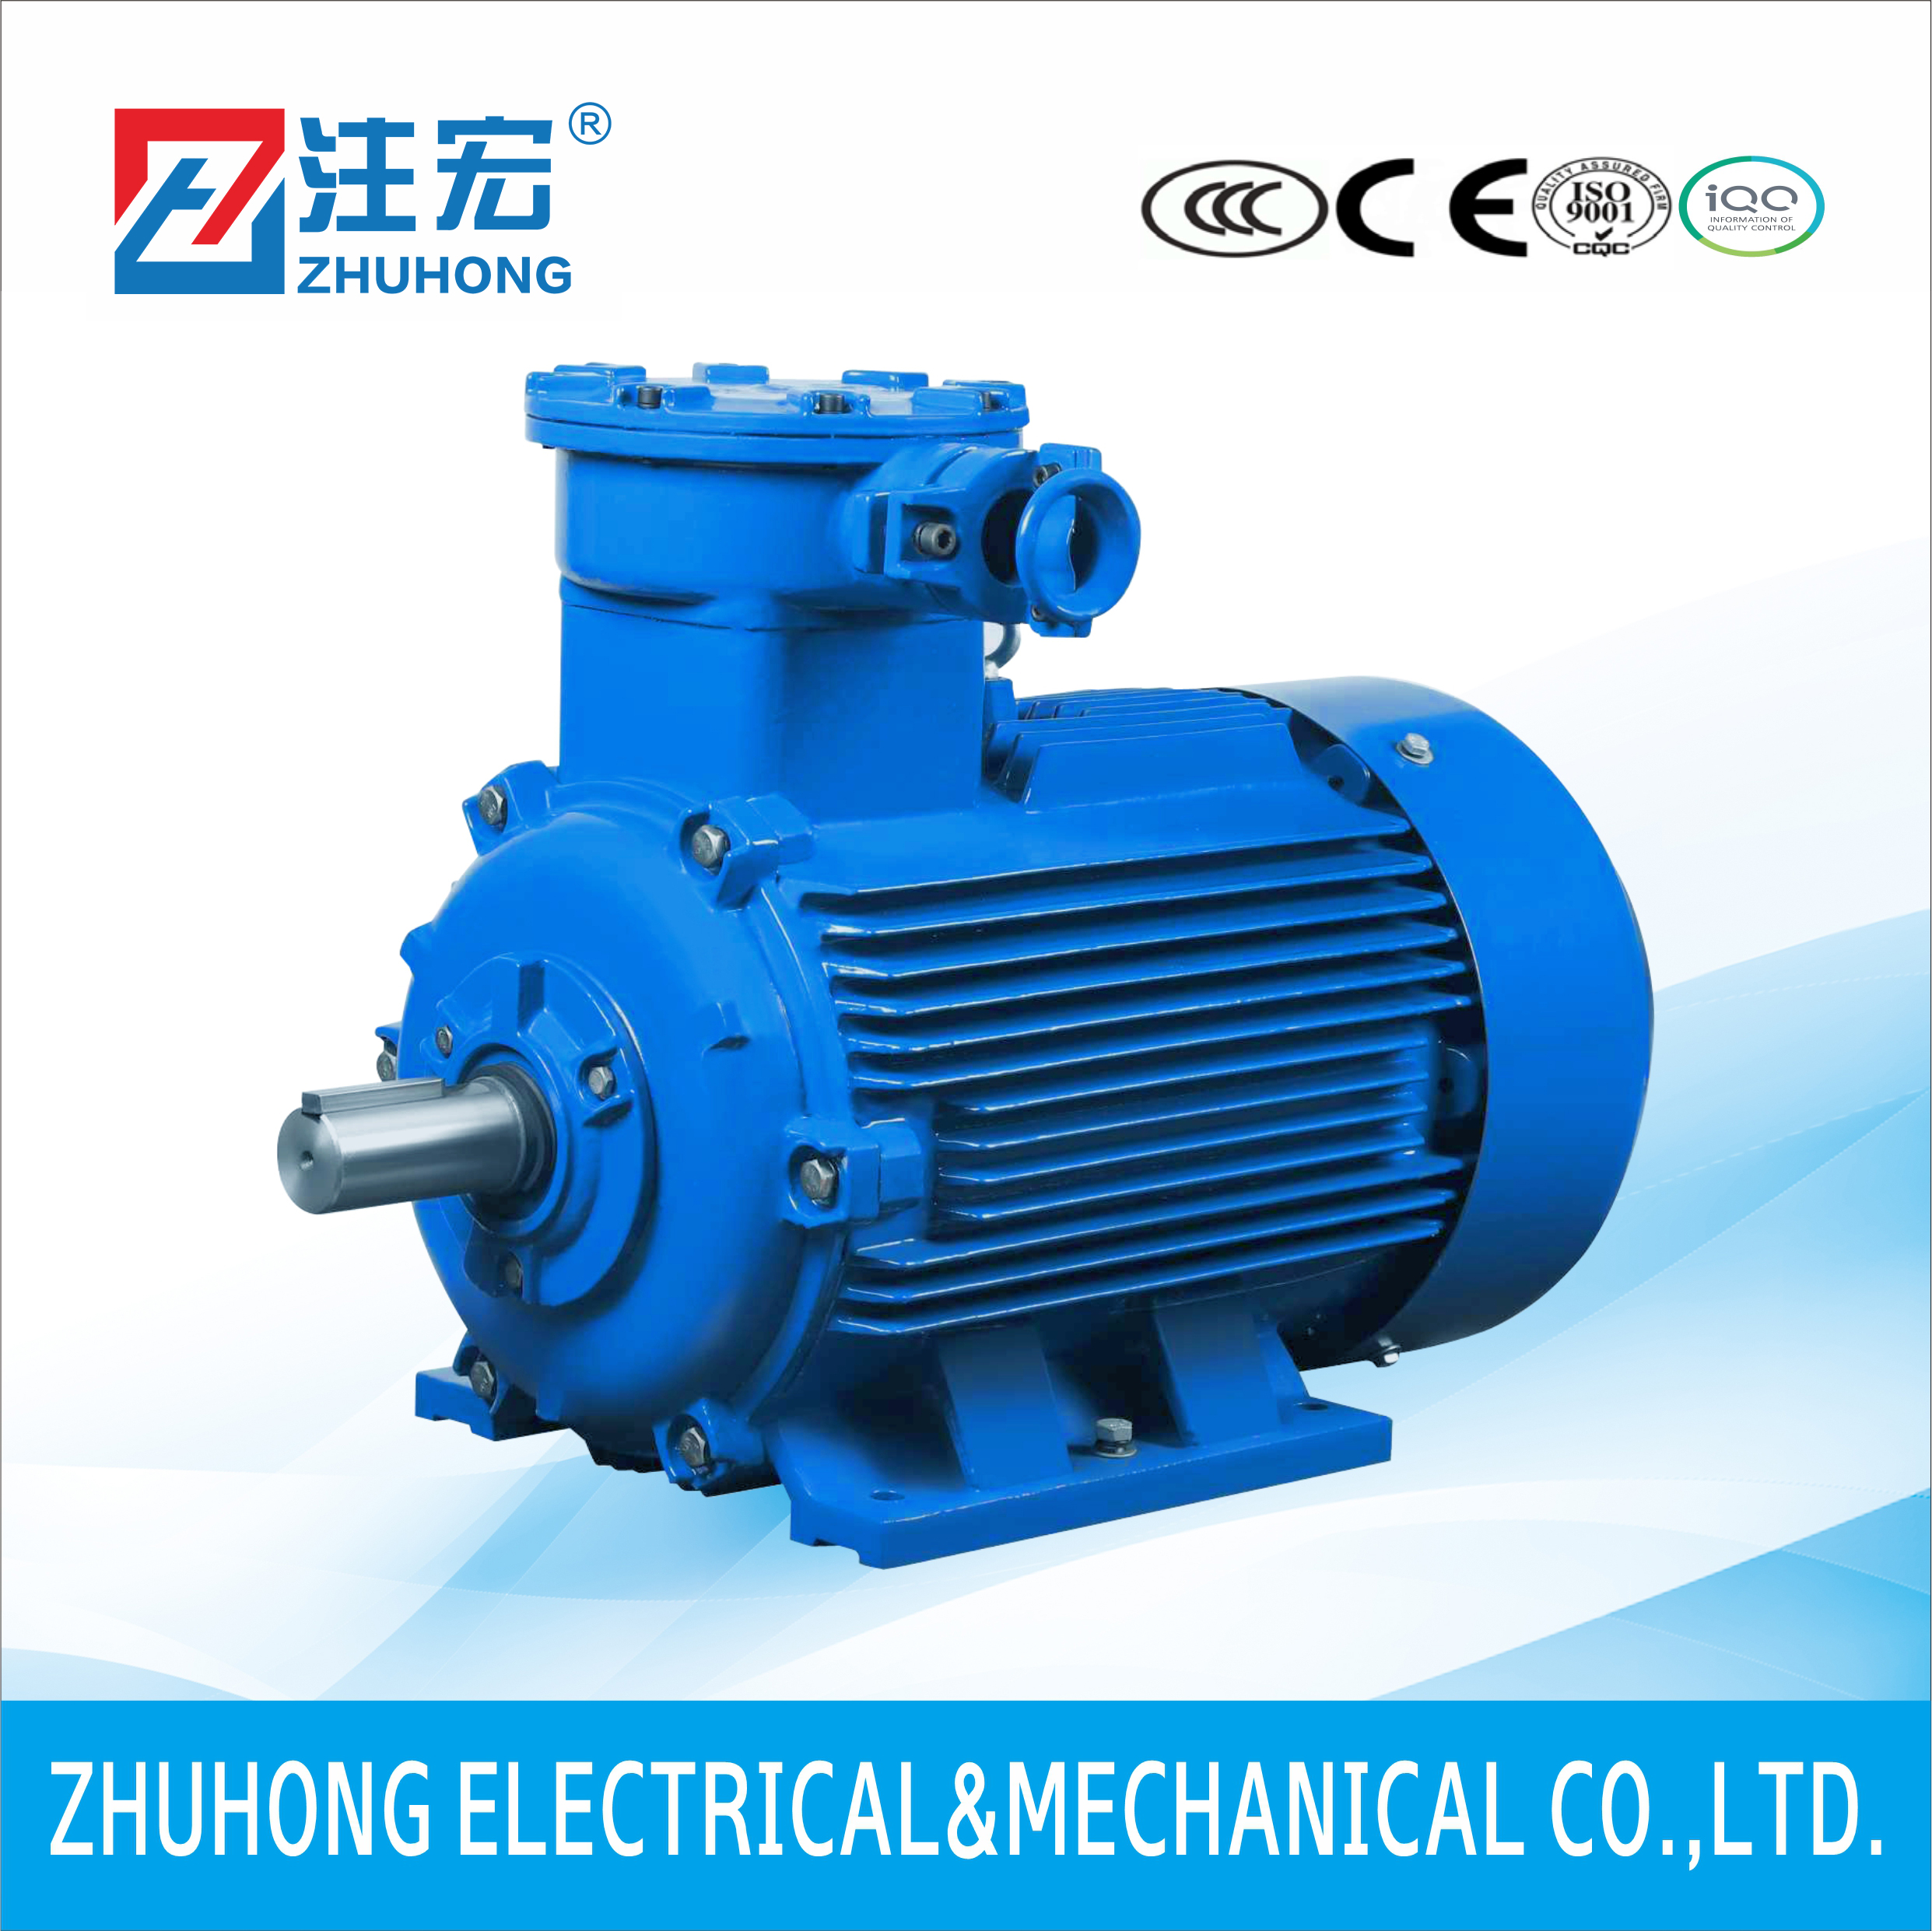 YBX3 Series High Efficiency Explosion-Proof Three Phase Induction Electric Motor Featured Image